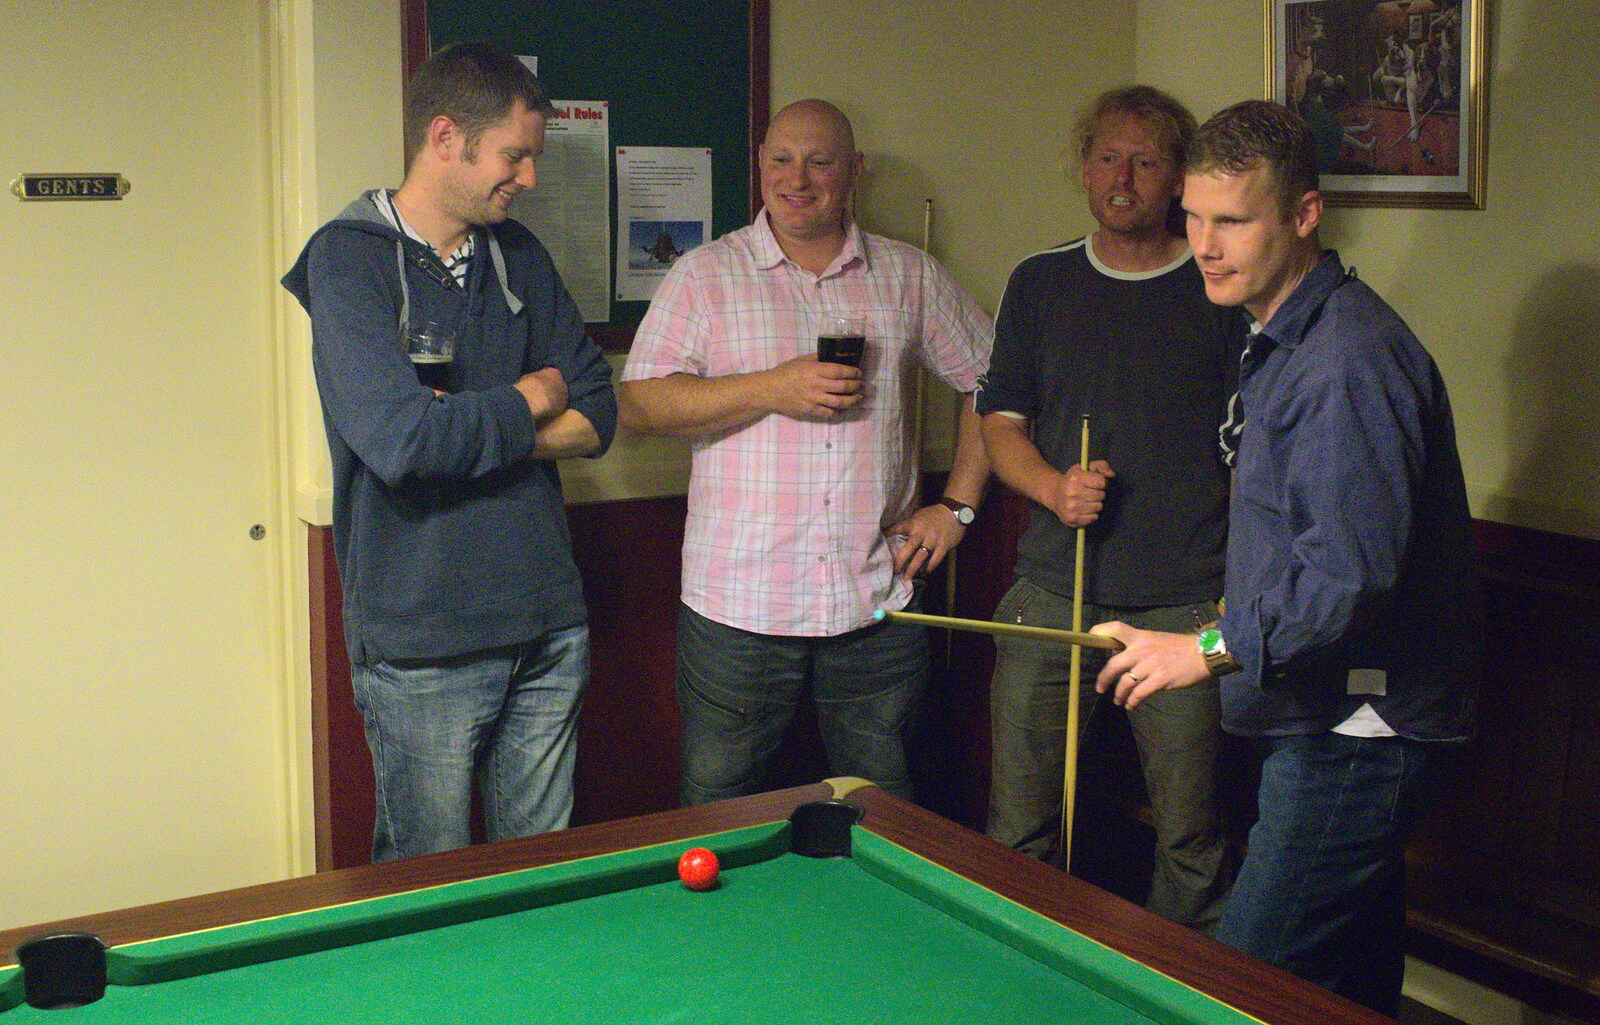 Phil, Gov, Wavy and Mikey from Stick Game at the Cross Keys, Redgrave, Suffolk - 20th July 2012